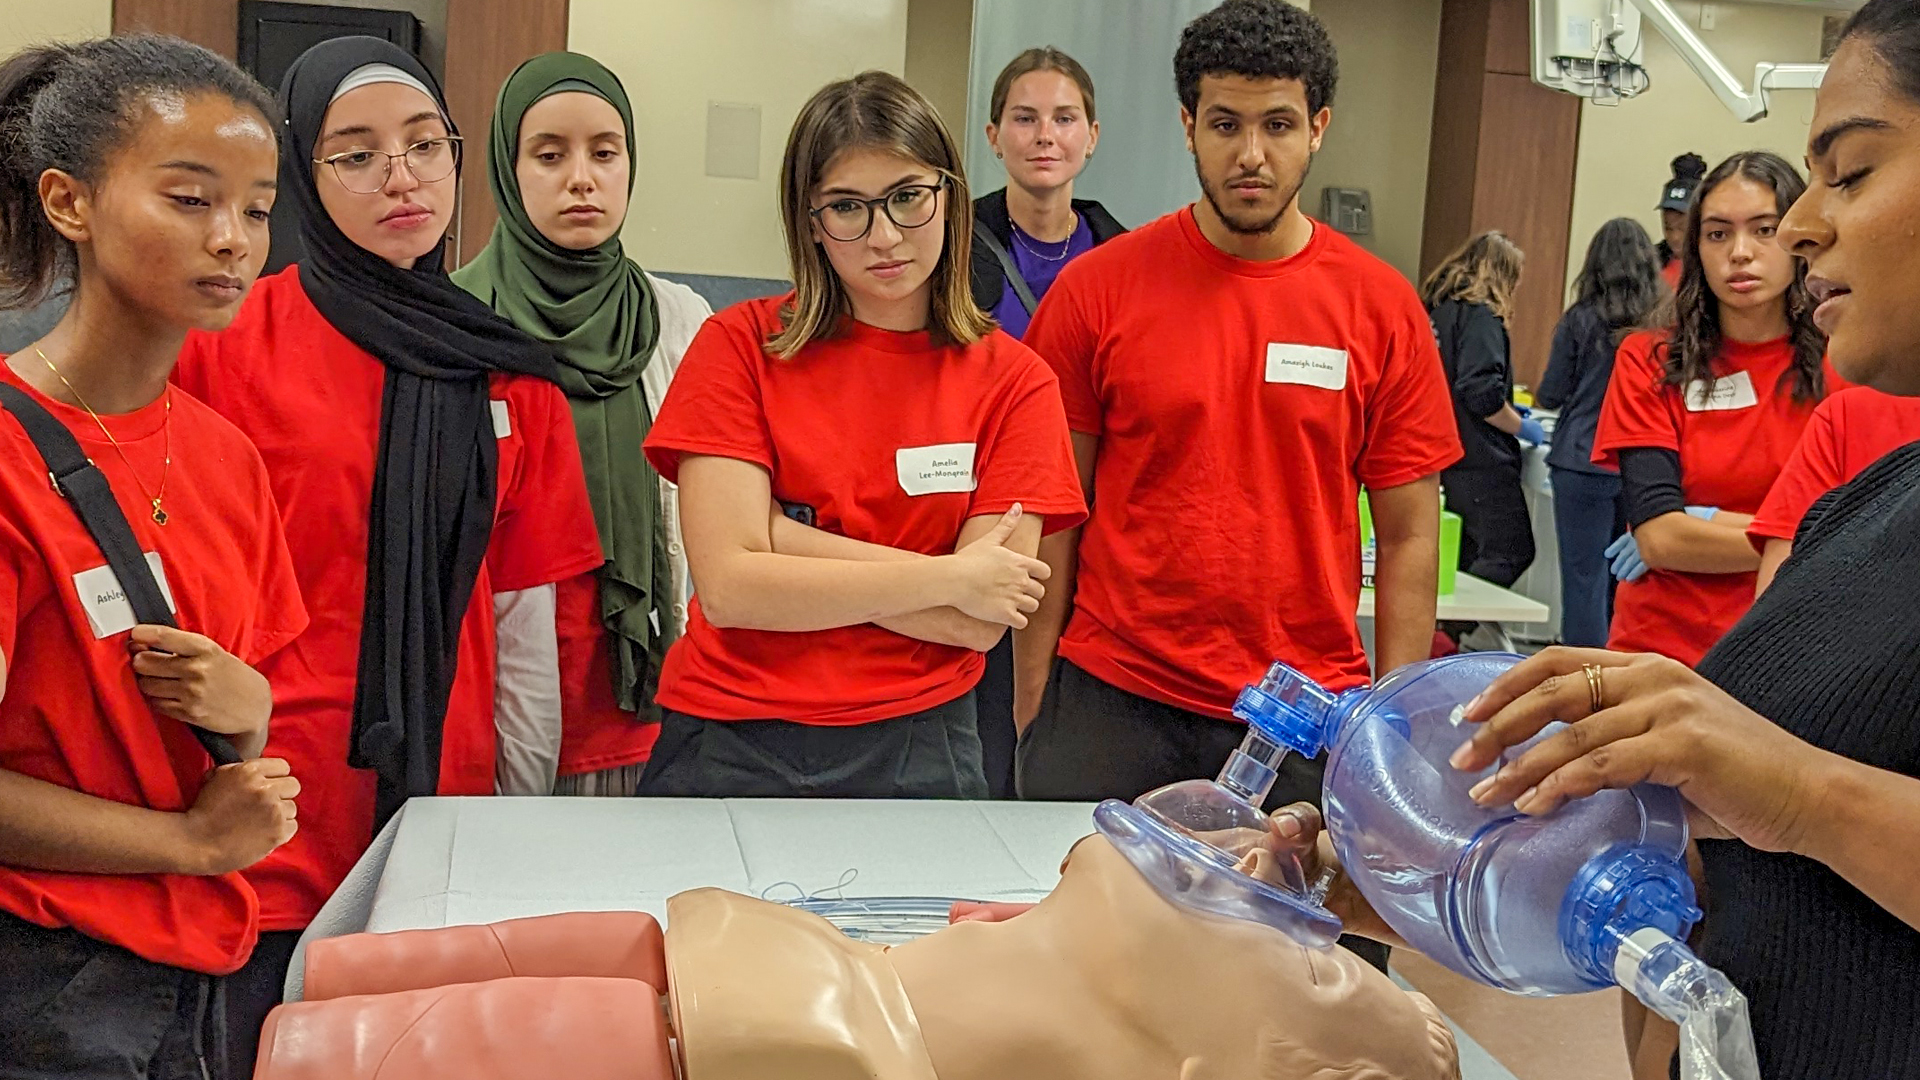 Demonstrating intubation and airways